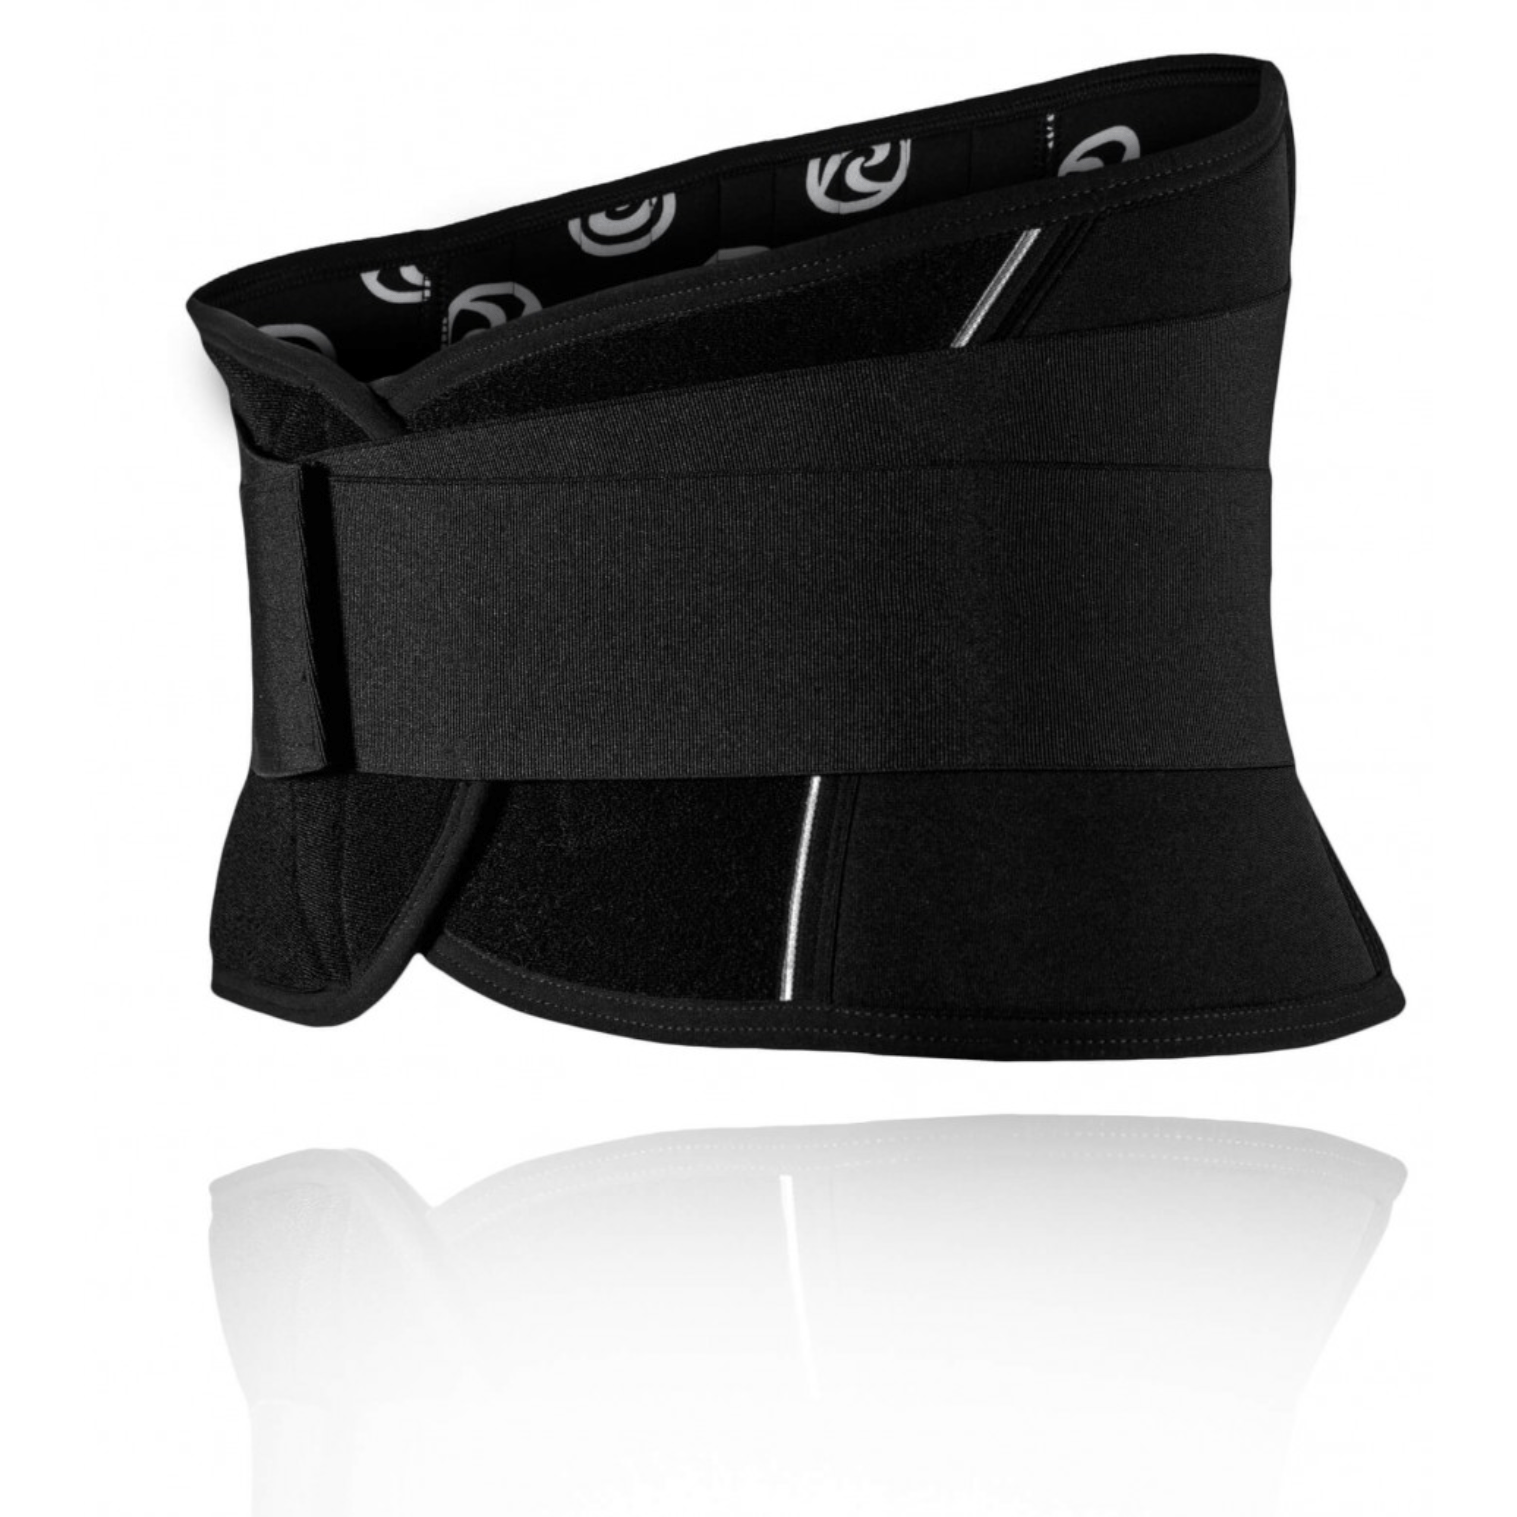 Rehband Black UD X-stable Back Support 123606